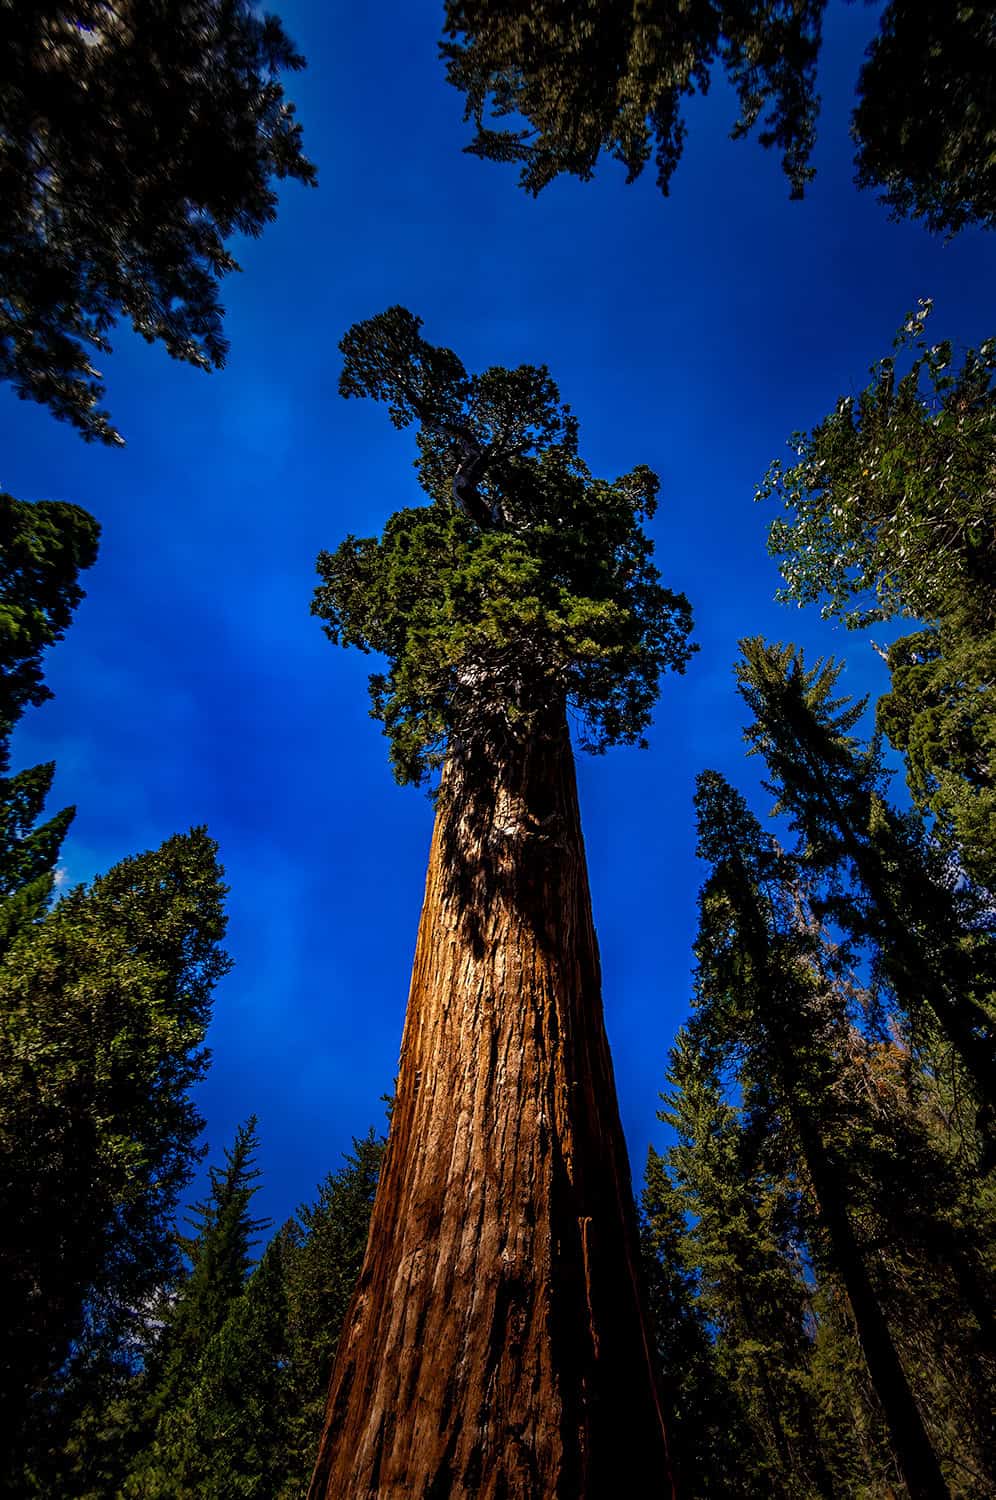  An upward view of the General Grant tree with blue skies in King's Canyon 